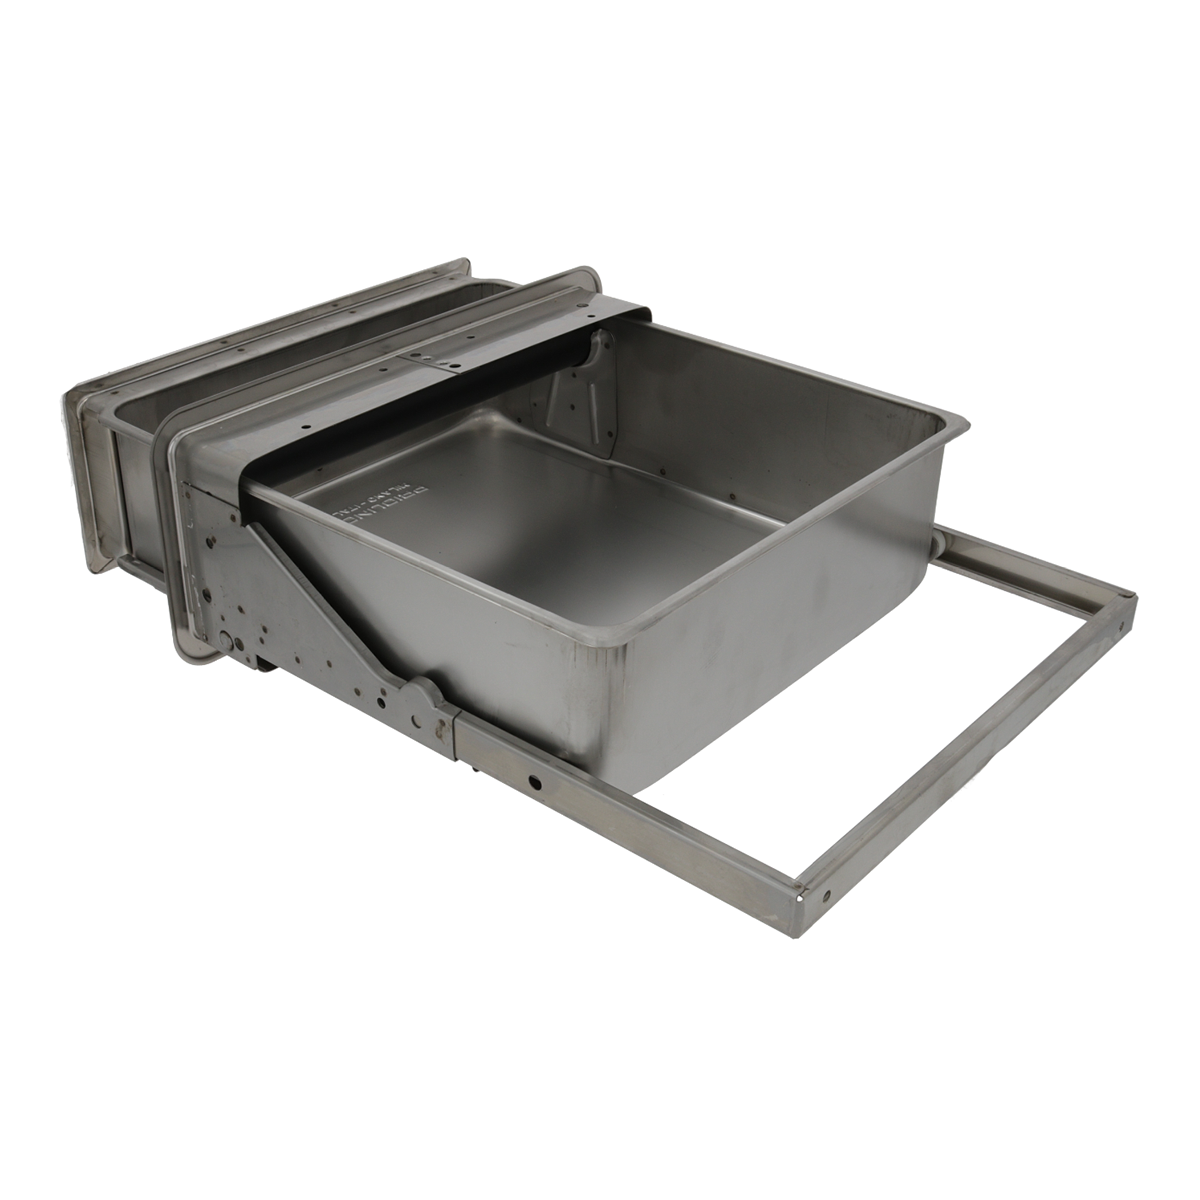 Stainless Steel Pull-out Knockbox Drawer